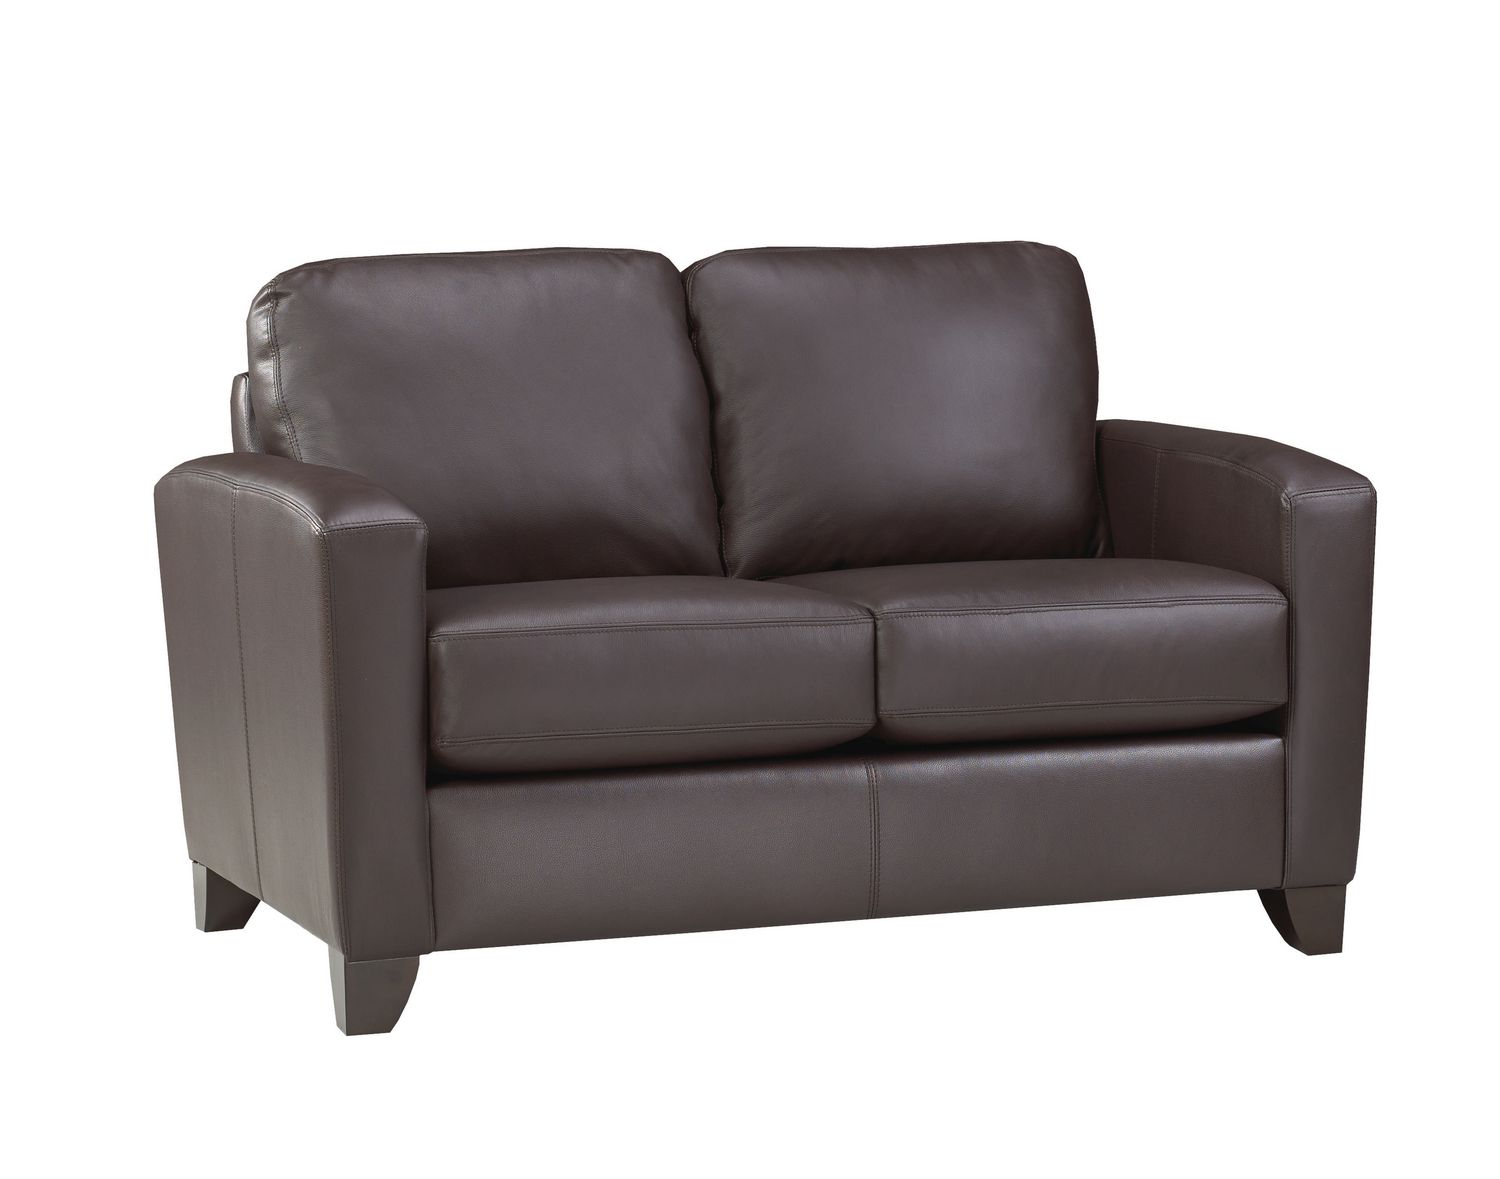 Canadian Made Astoria Leather Loveseat, Best Canadian Made Leather Sofas